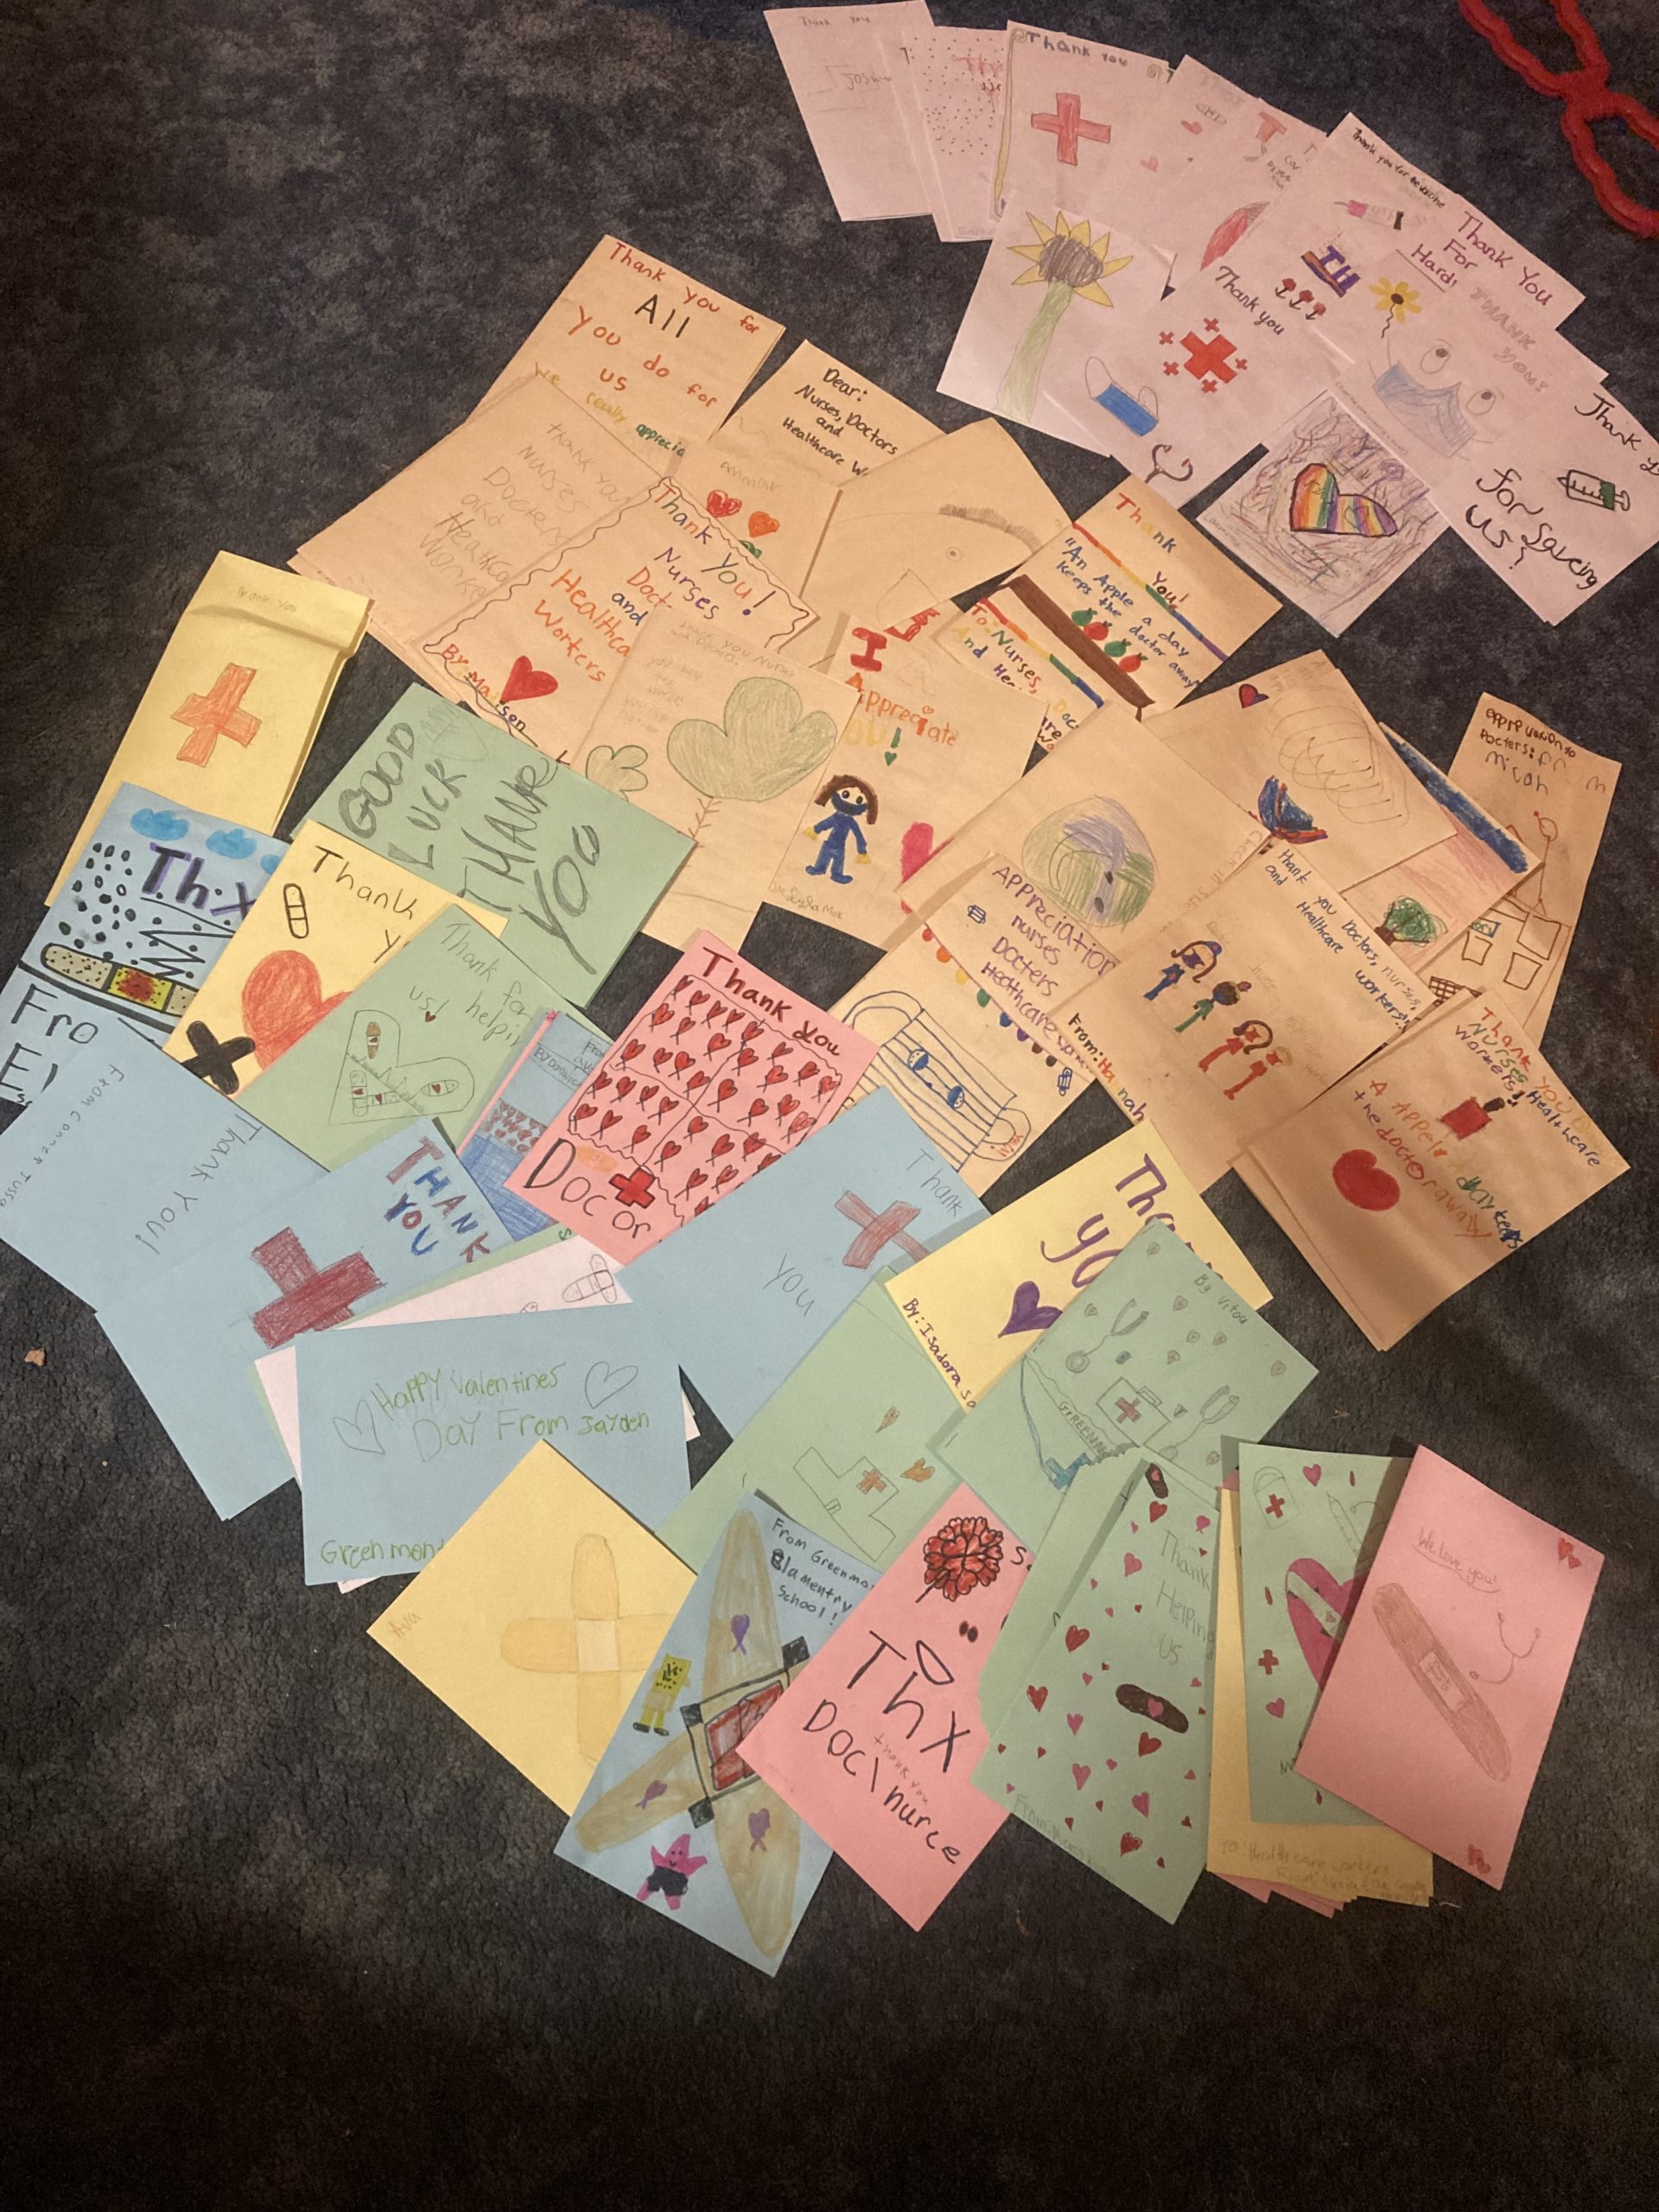 Cards of Appreciation & Love from Greenmont School